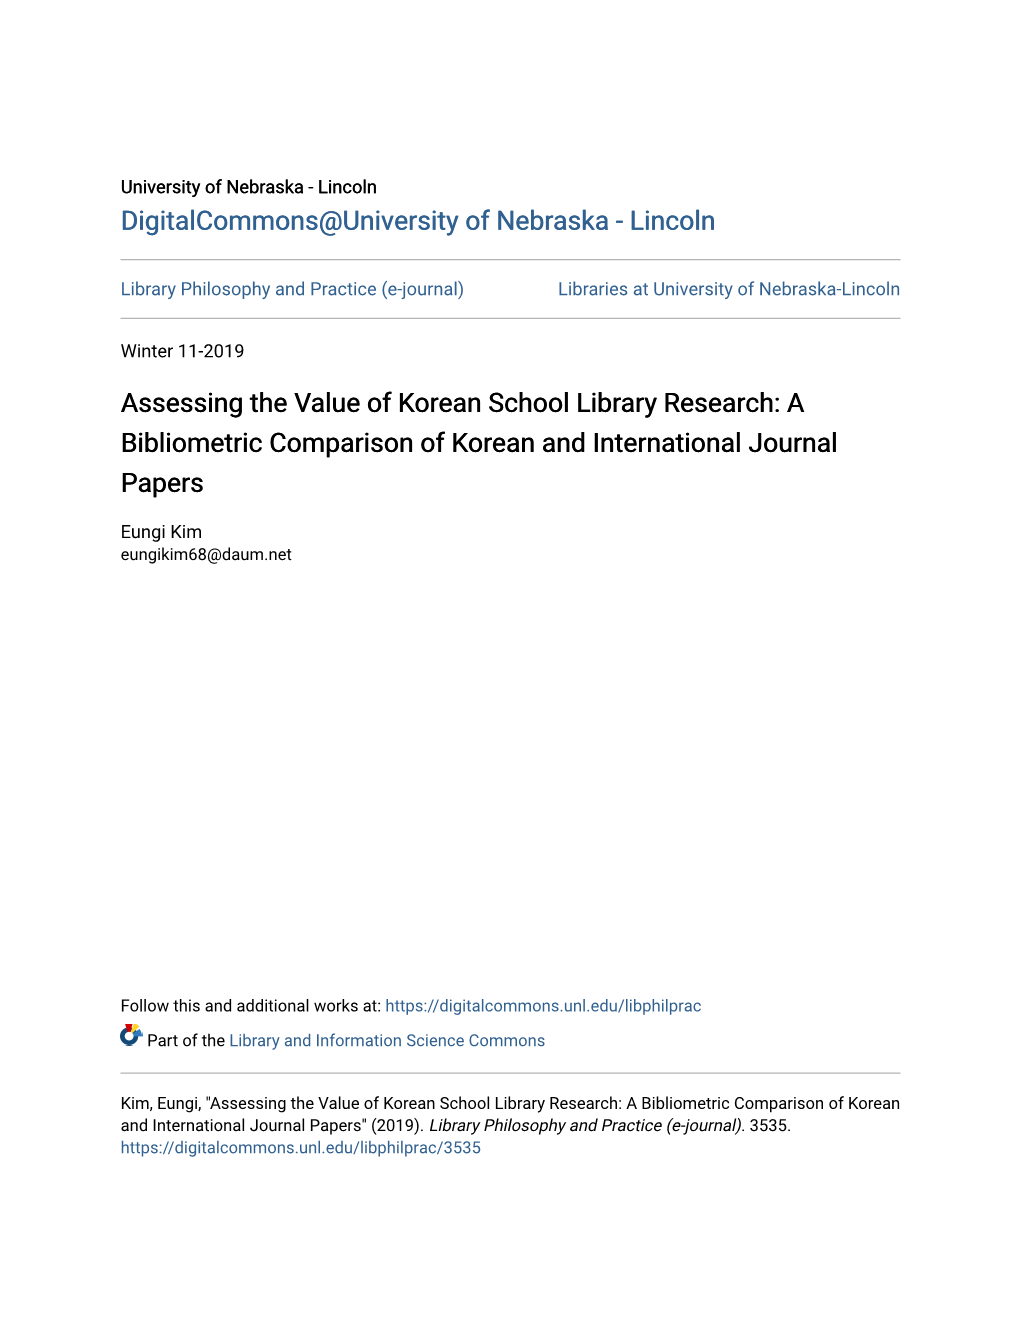 Assessing the Value of Korean School Library Research: a Bibliometric Comparison of Korean and International Journal Papers